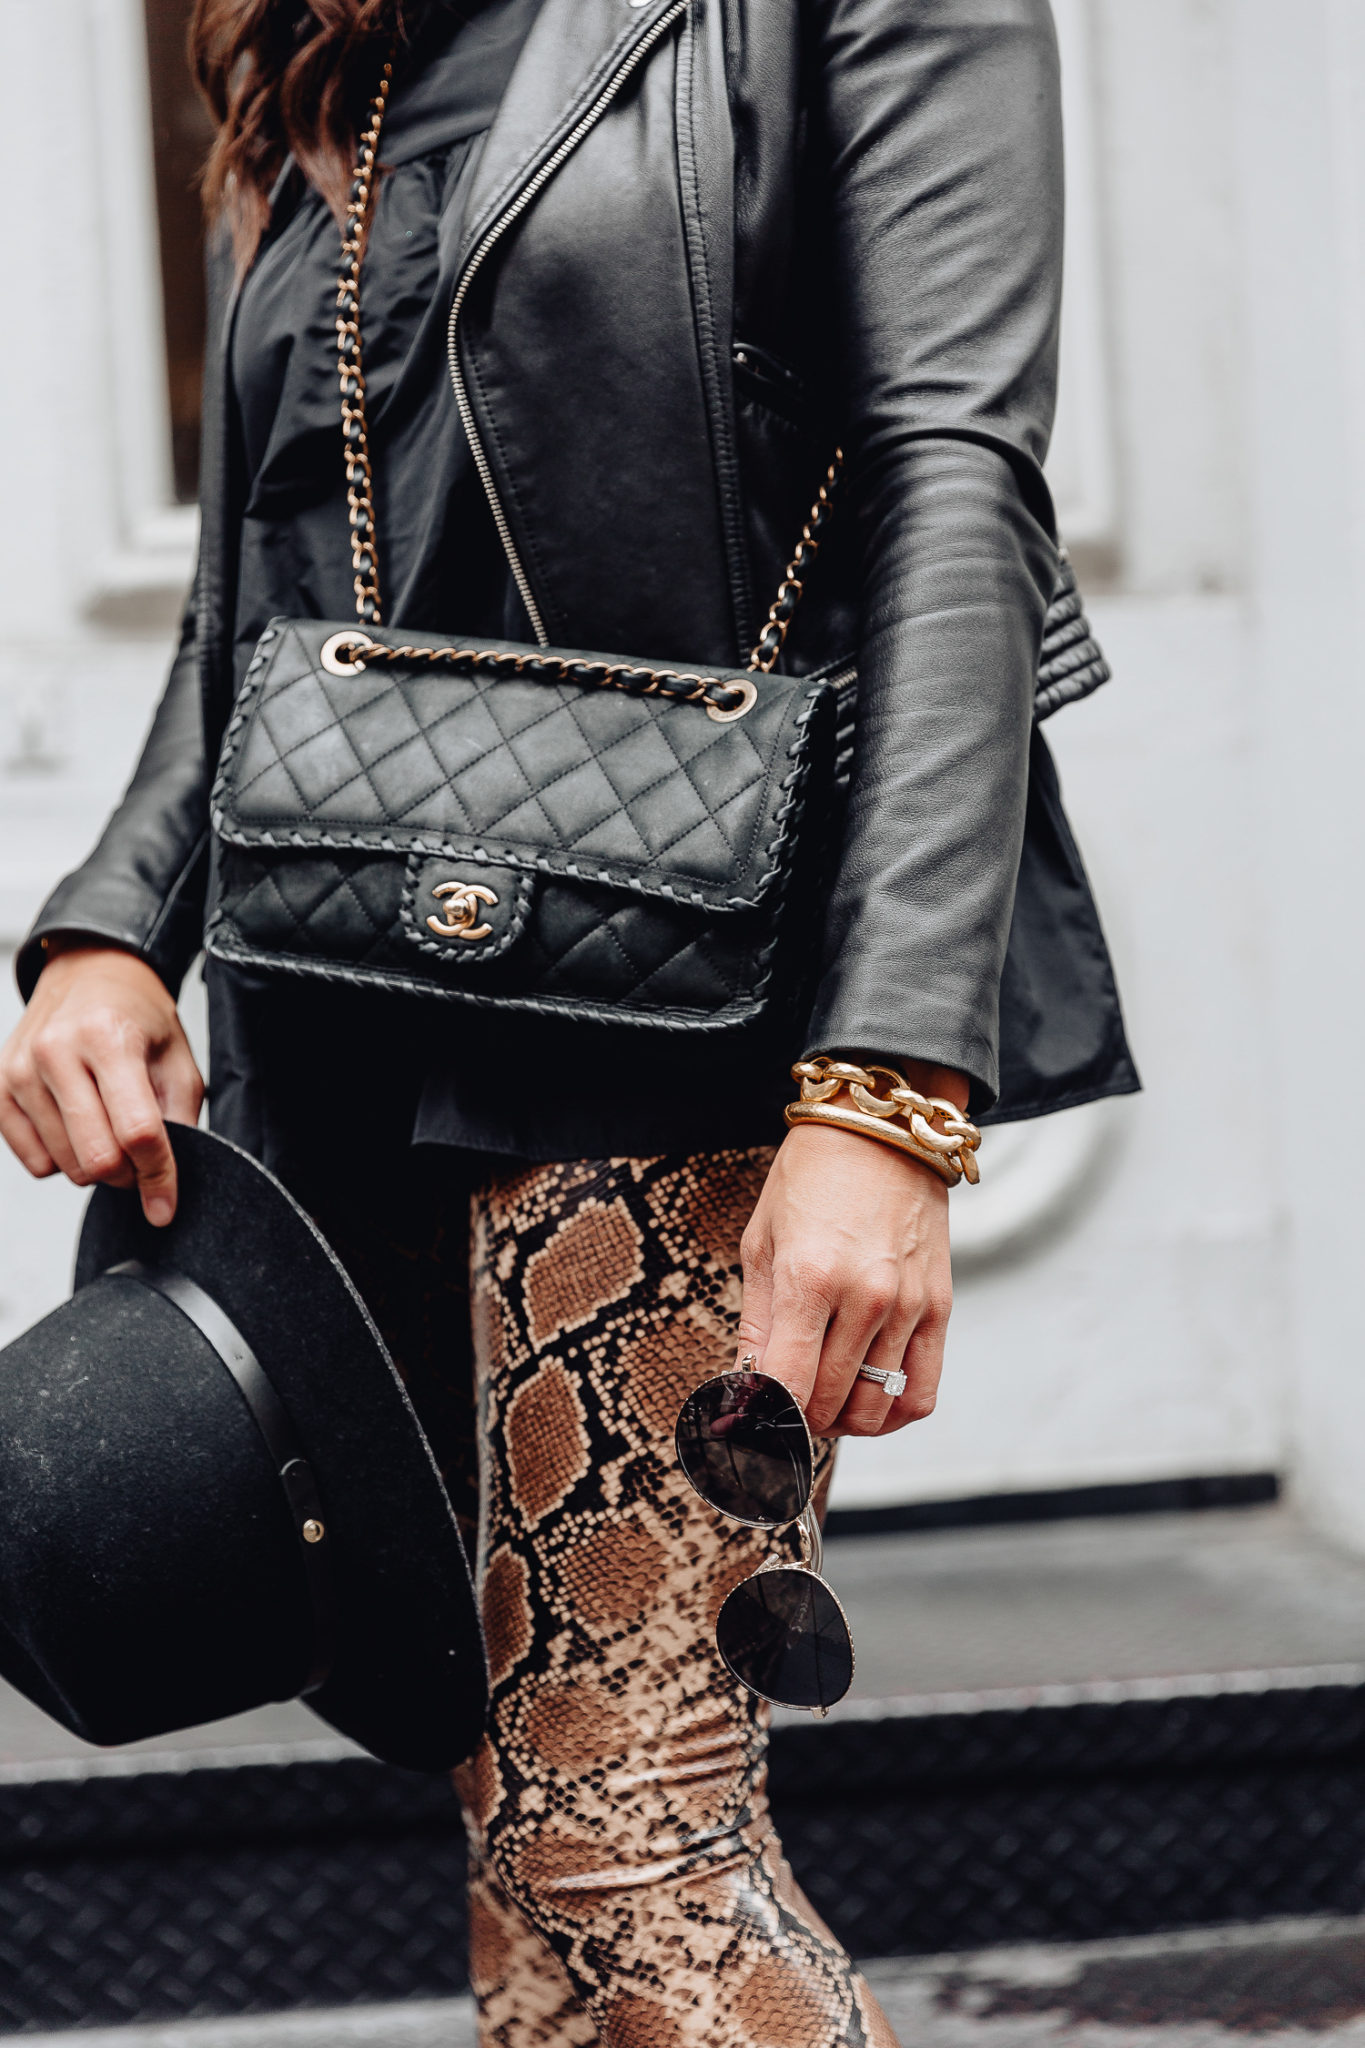 How to style the Snakeskin Print Trend